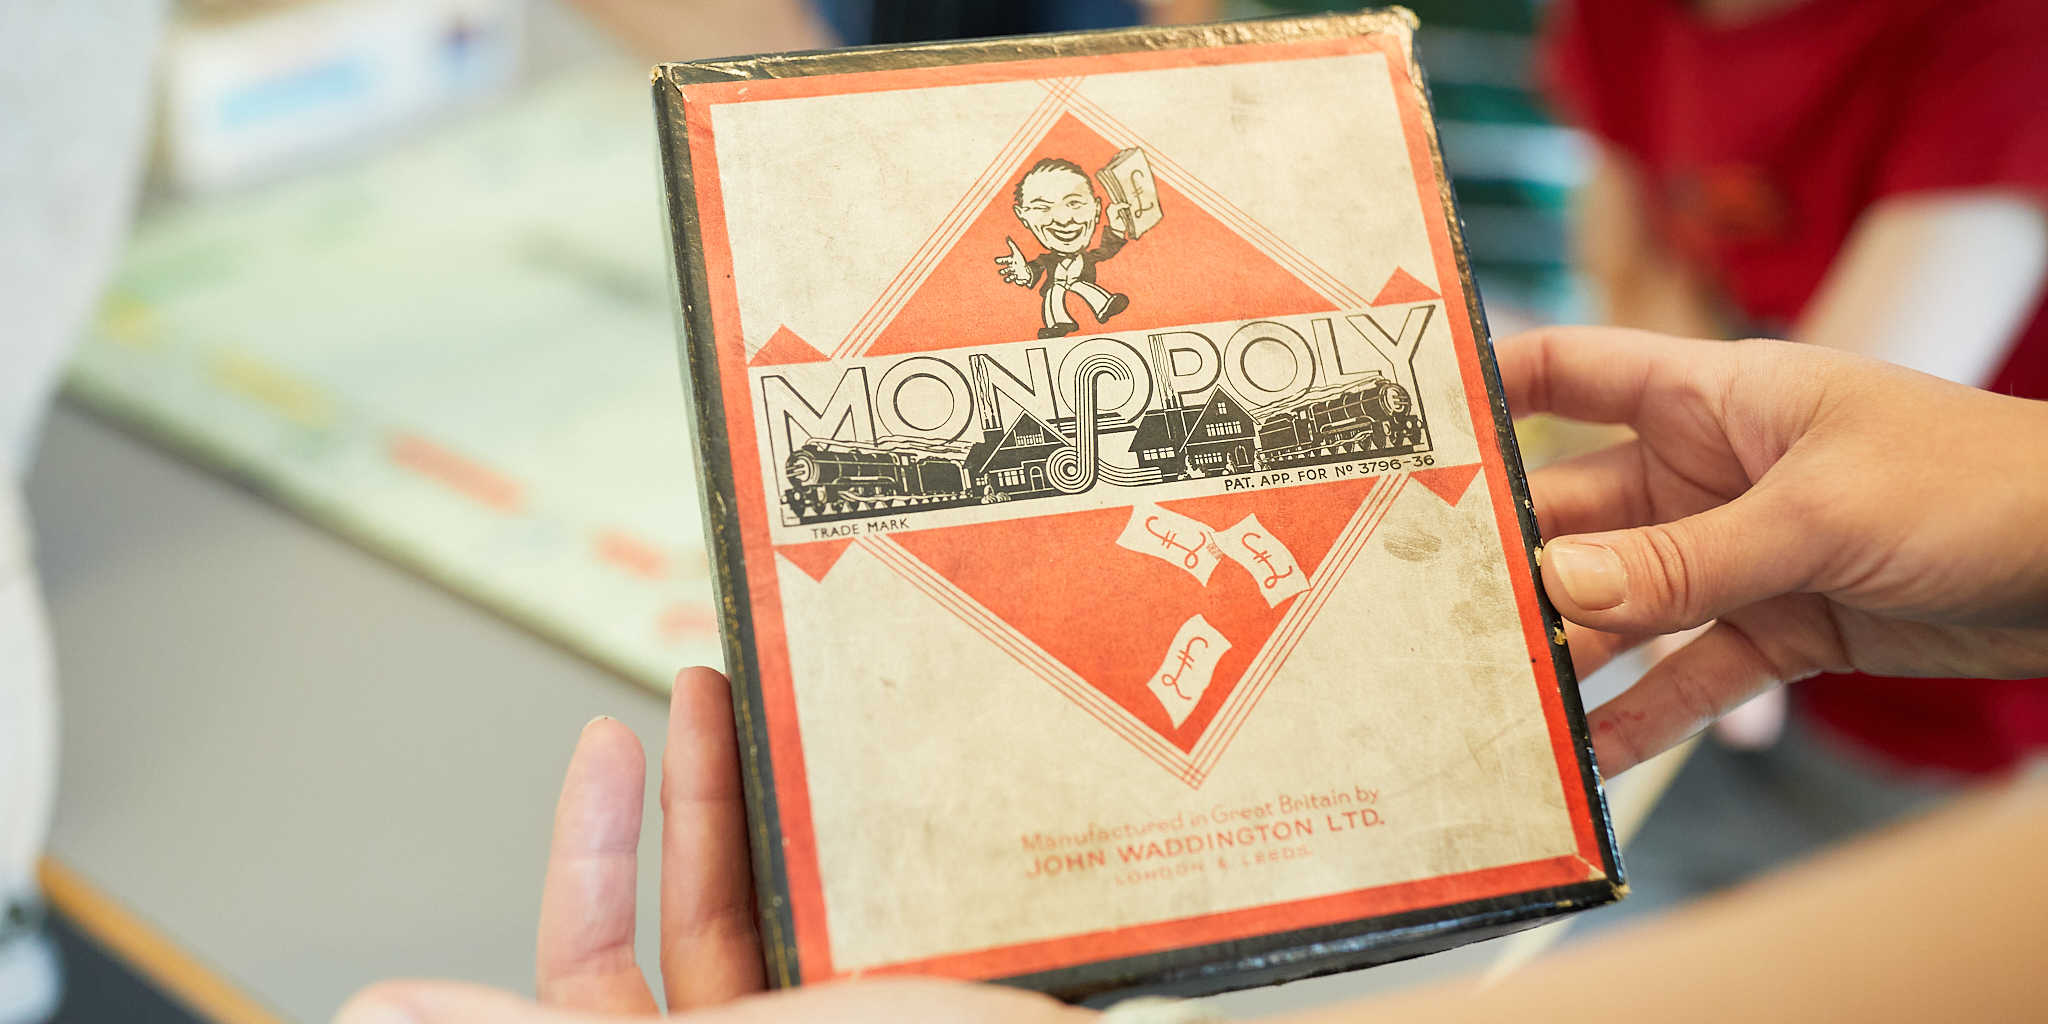 Two hands holding an old monopoly board game box